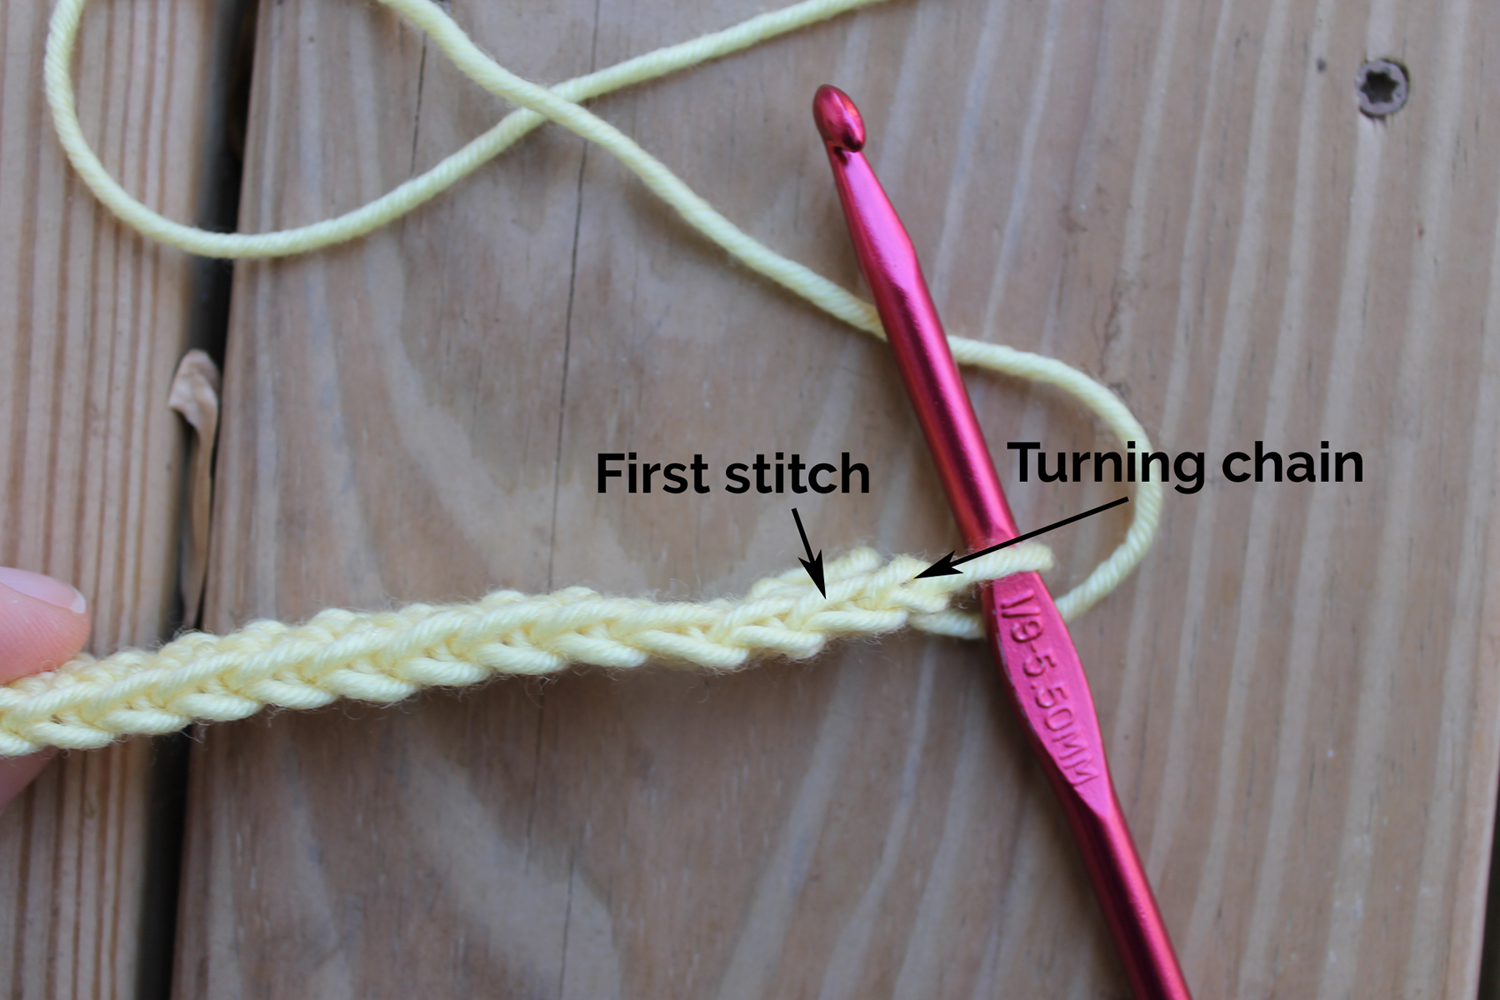 Top of a crochet row with turning chain